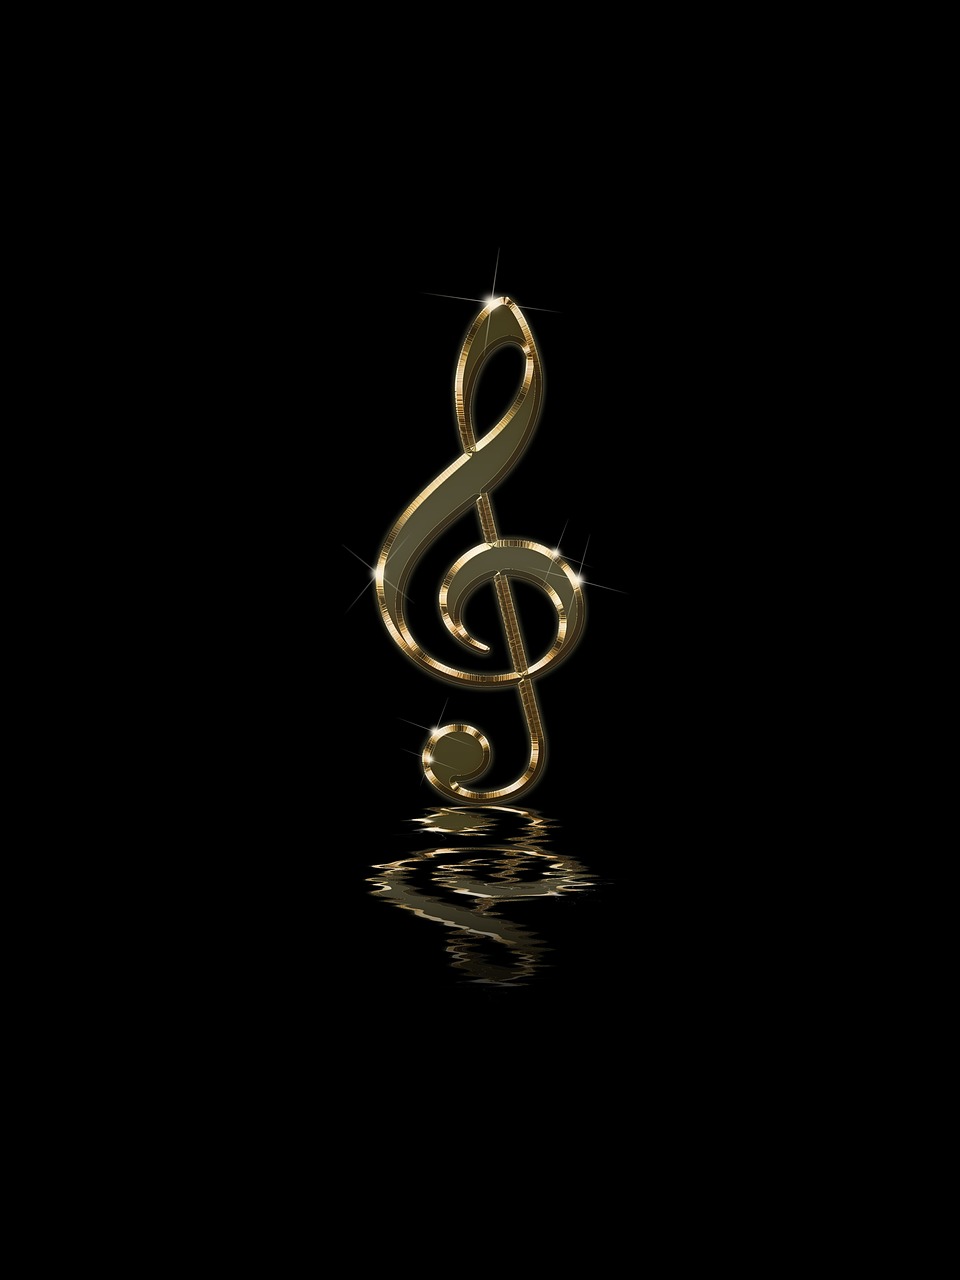 musical note clef background free photo